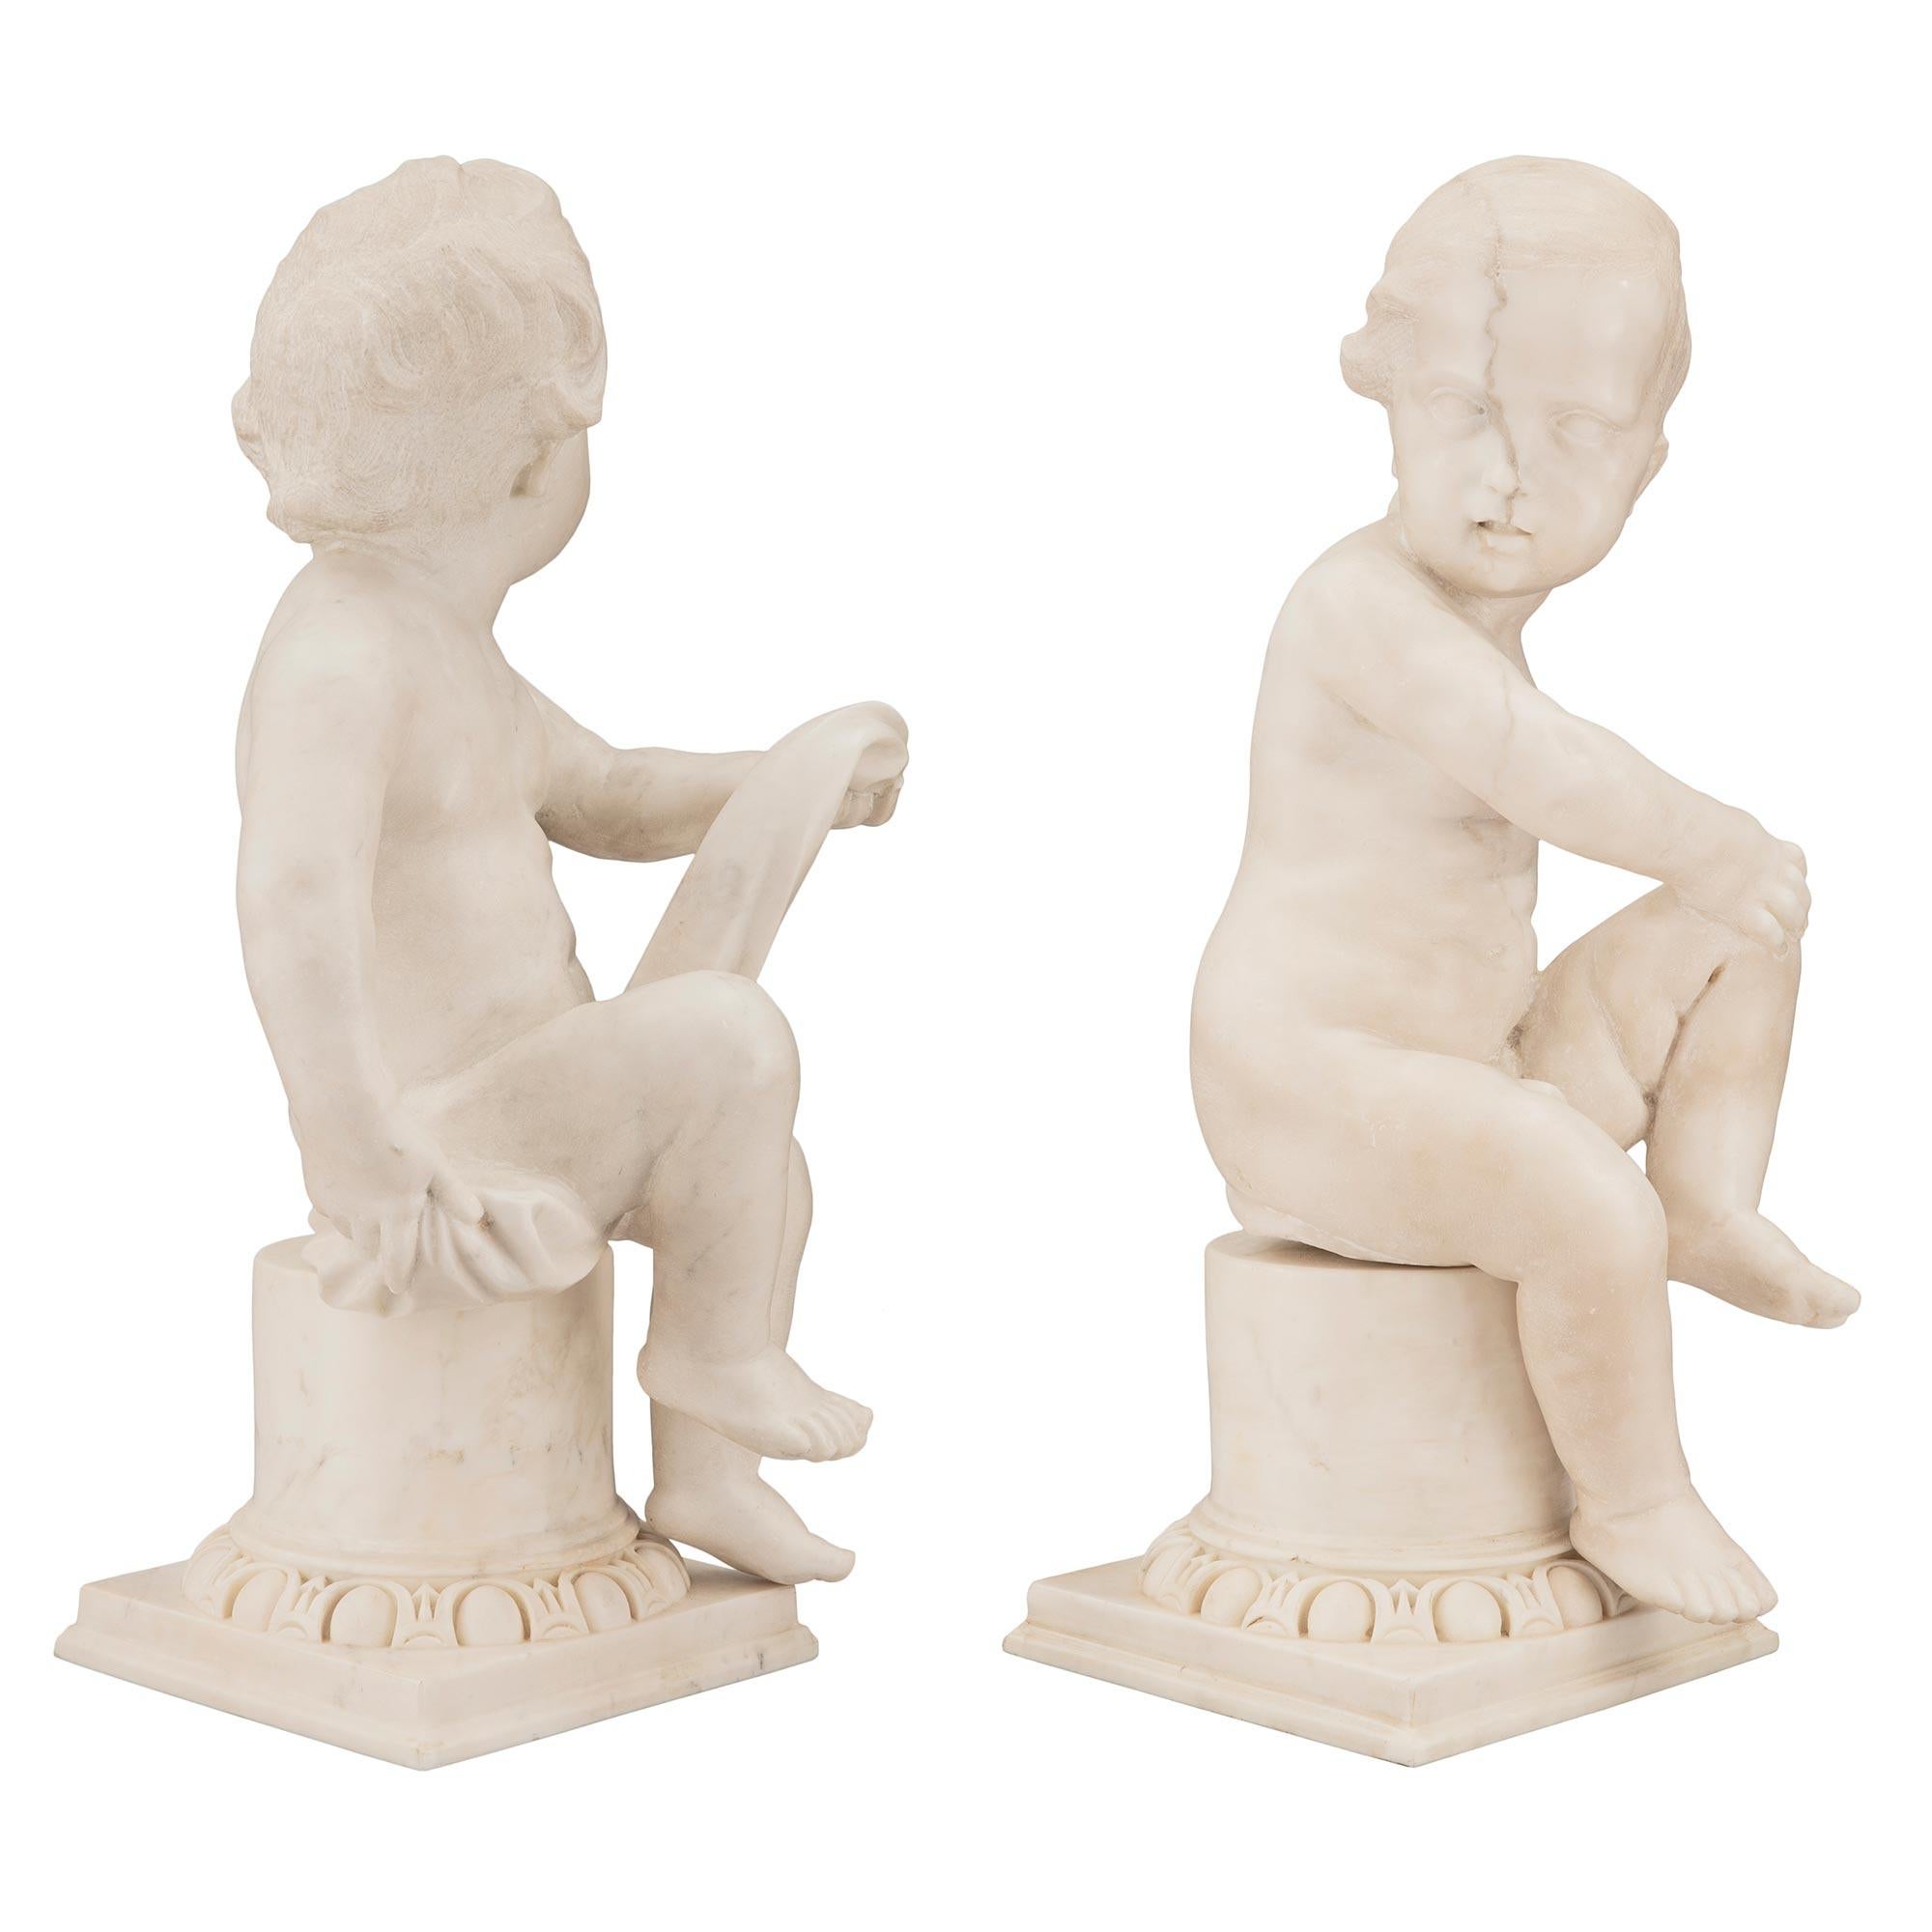 A charming true pair of Italian 18th century Louis XVI Period white carrara marble statues. Each statue is raised by a lovely square base with a Les Oves pattern and circular central support. Each charming and richly sculpted young boy is seated on